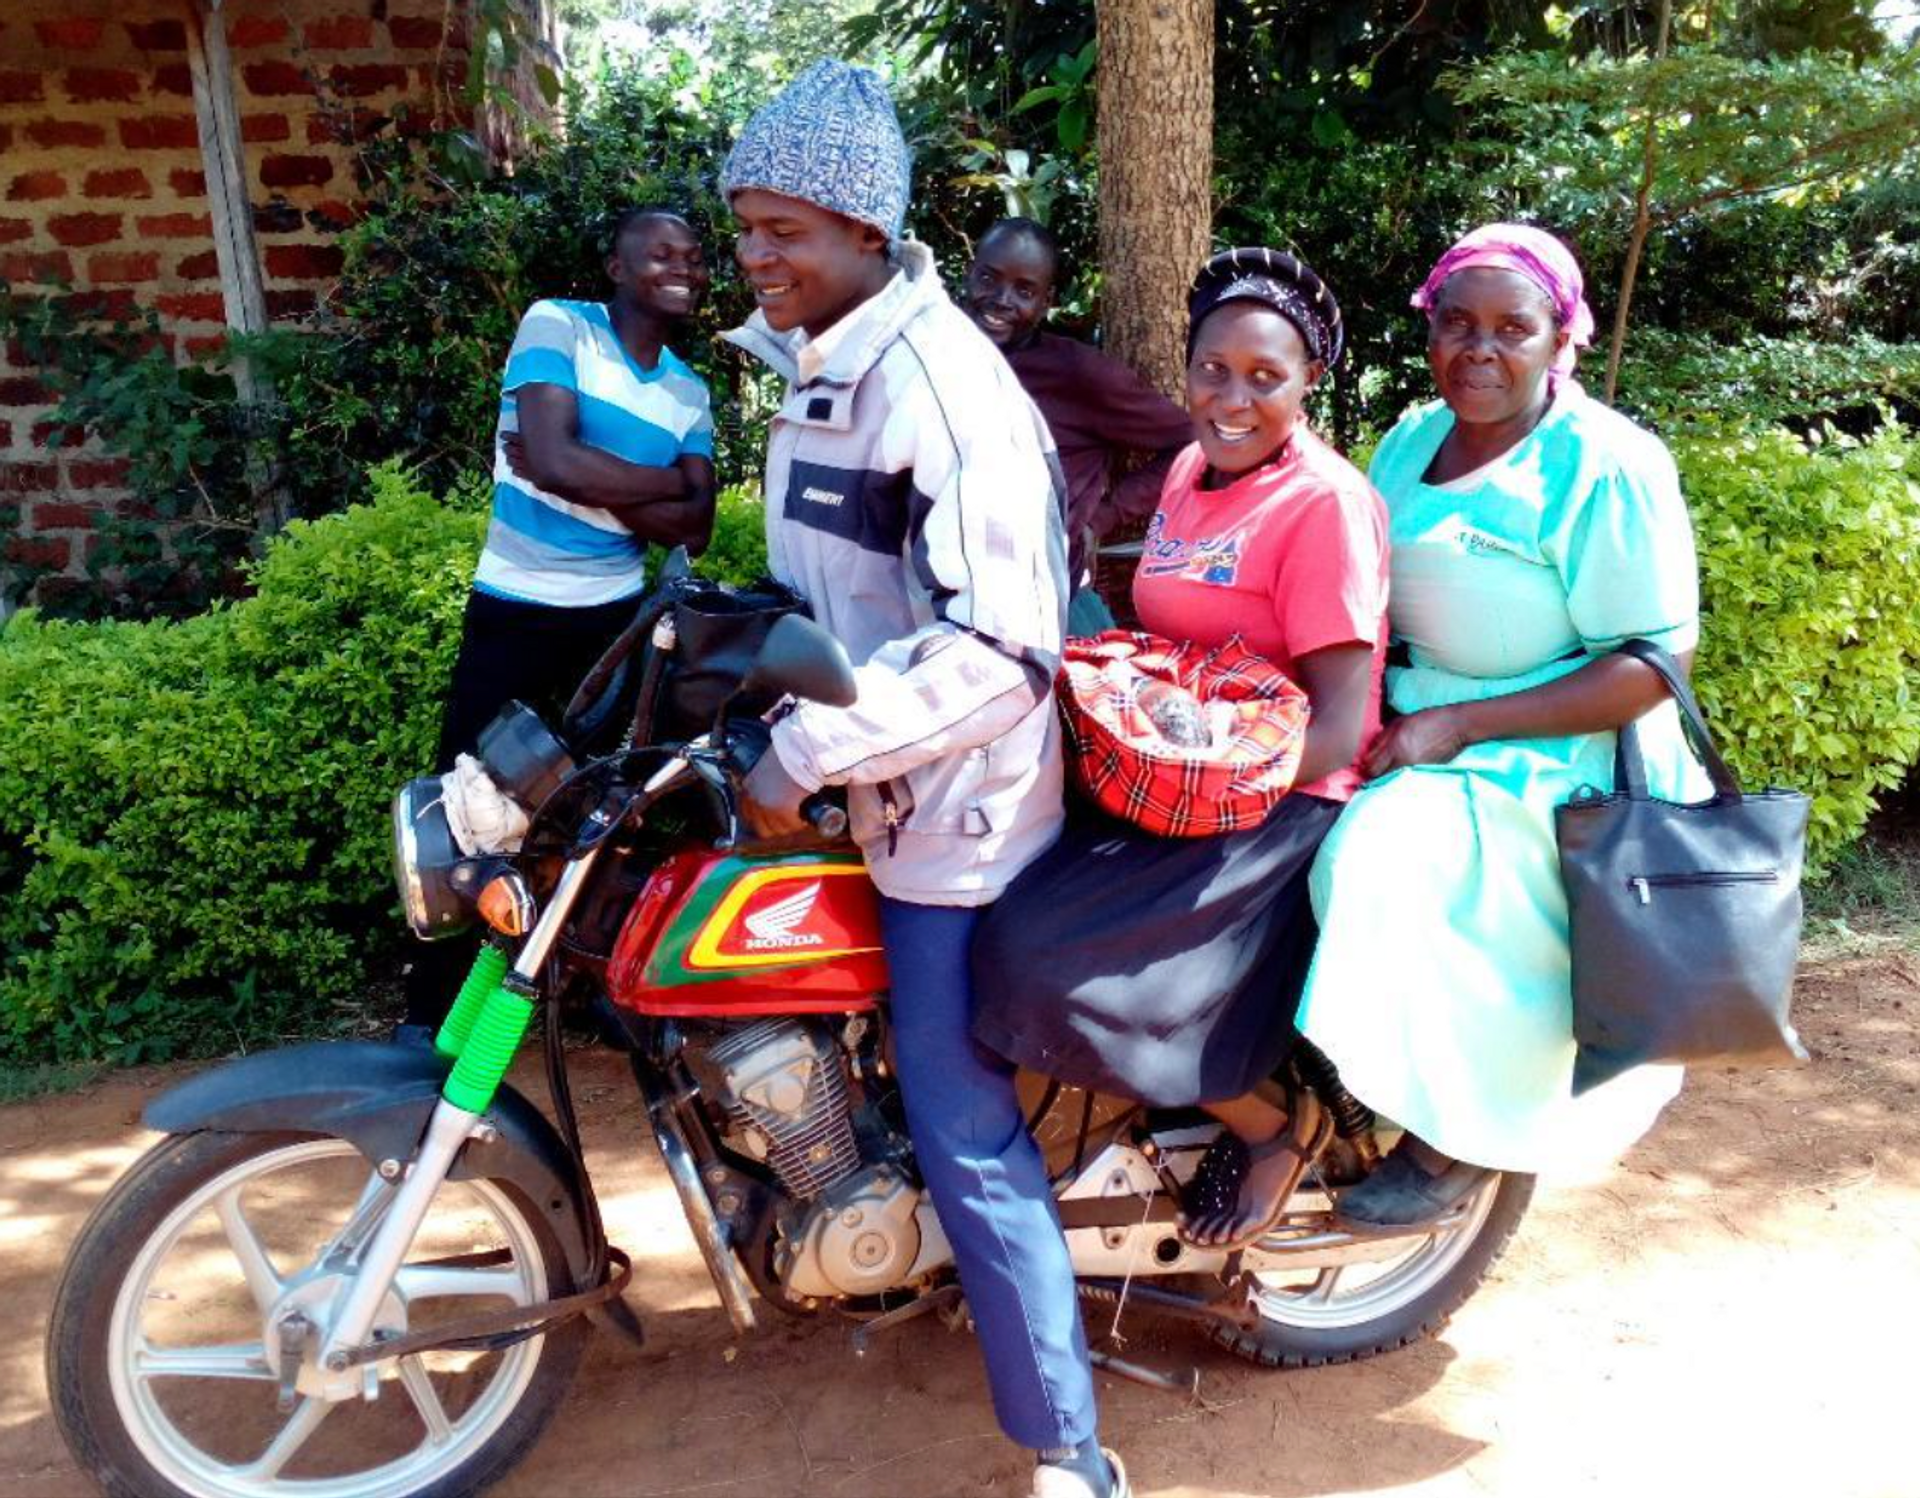 A new born baby going home! The baby is only 14 hours old! It is a motorbike taxi with the mother, baby and the Traditional Birth Attendant on the bike. It’s about a 40 minute ride on very rough roads.